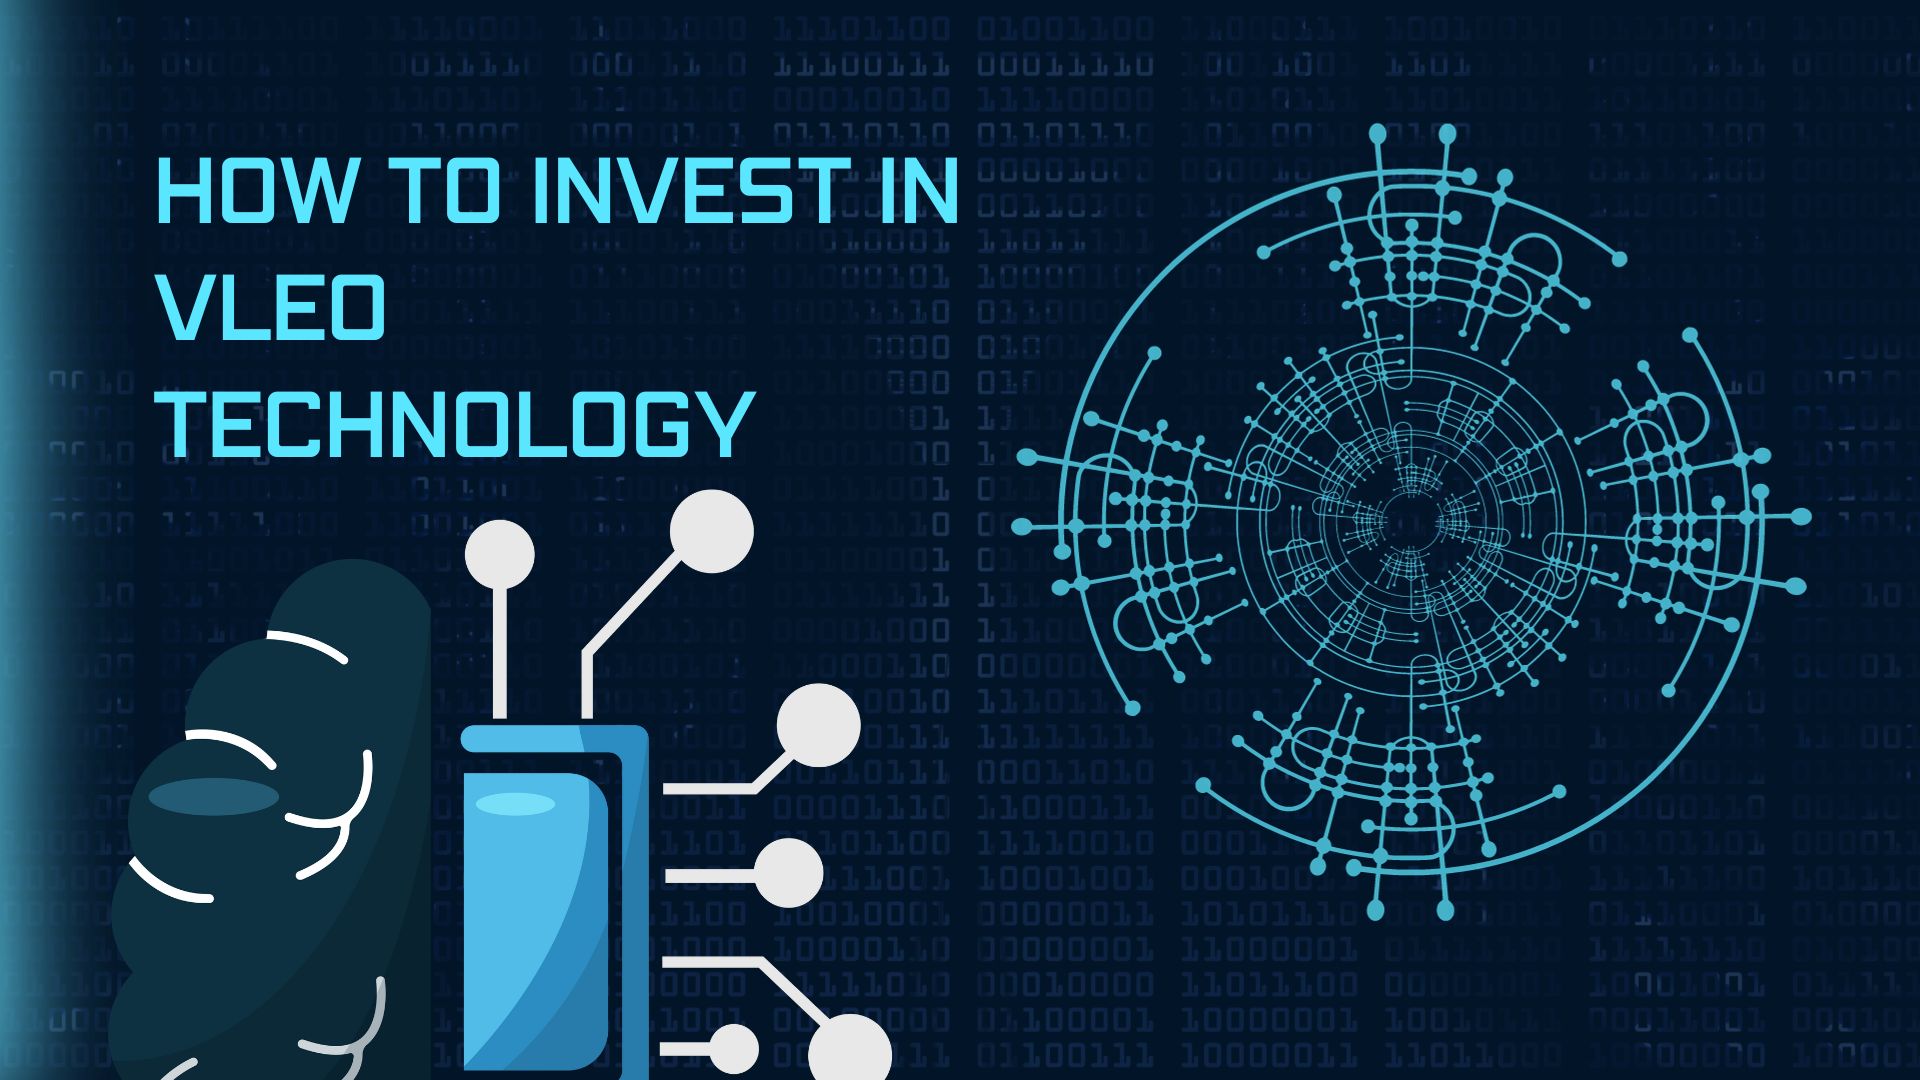 How to Invest in Vleo Technology